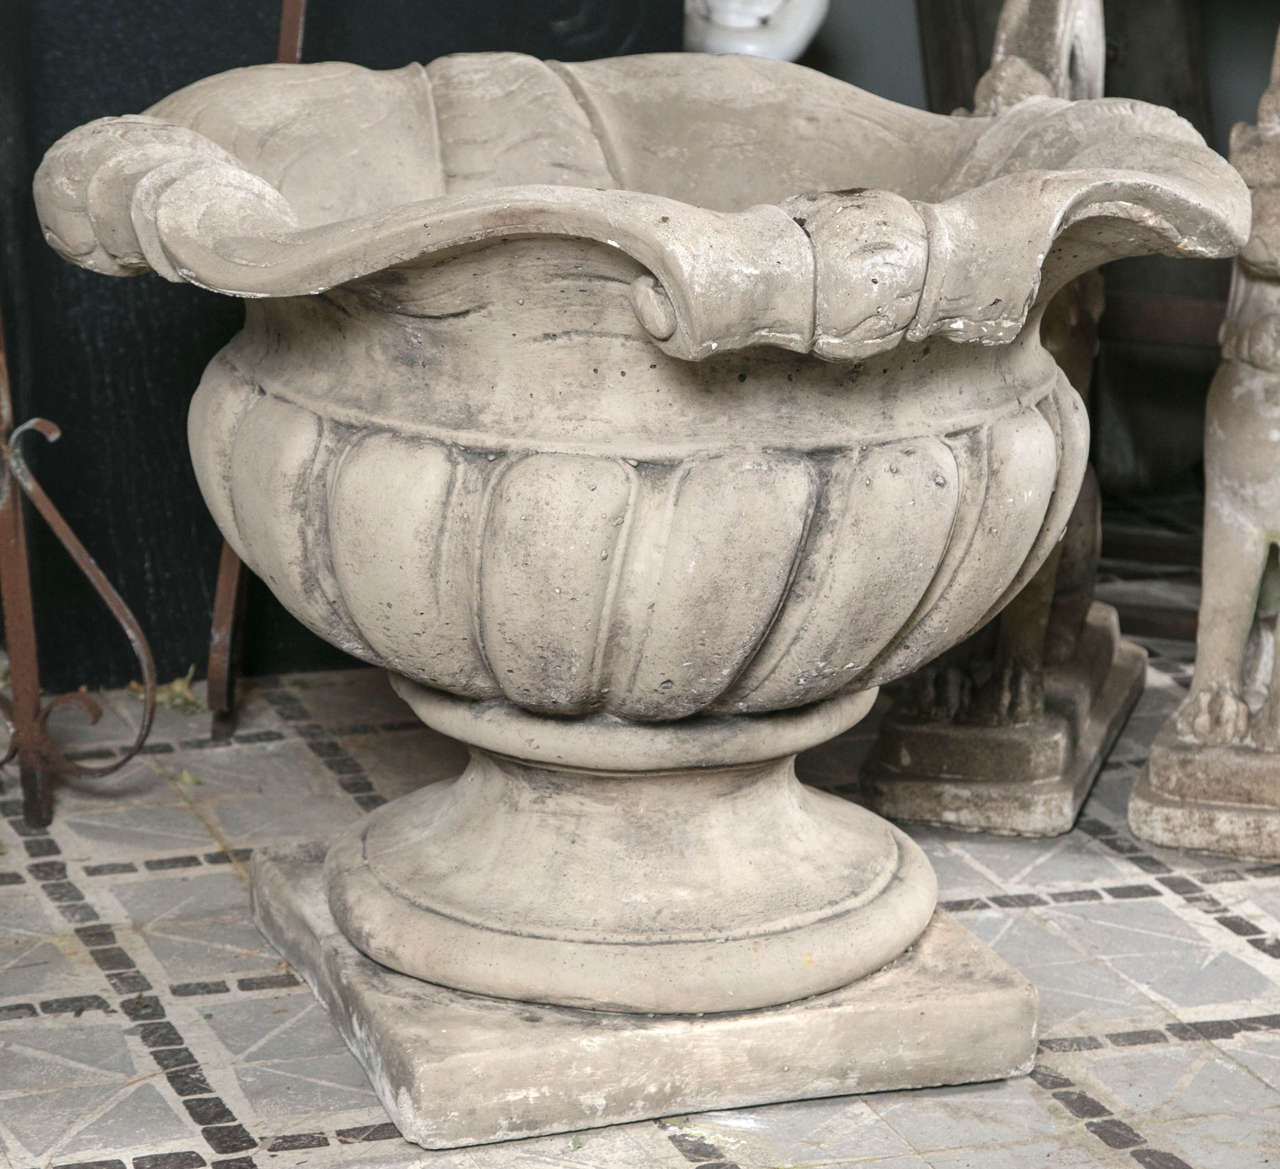 pair of English Garden urns large size with nice patina.